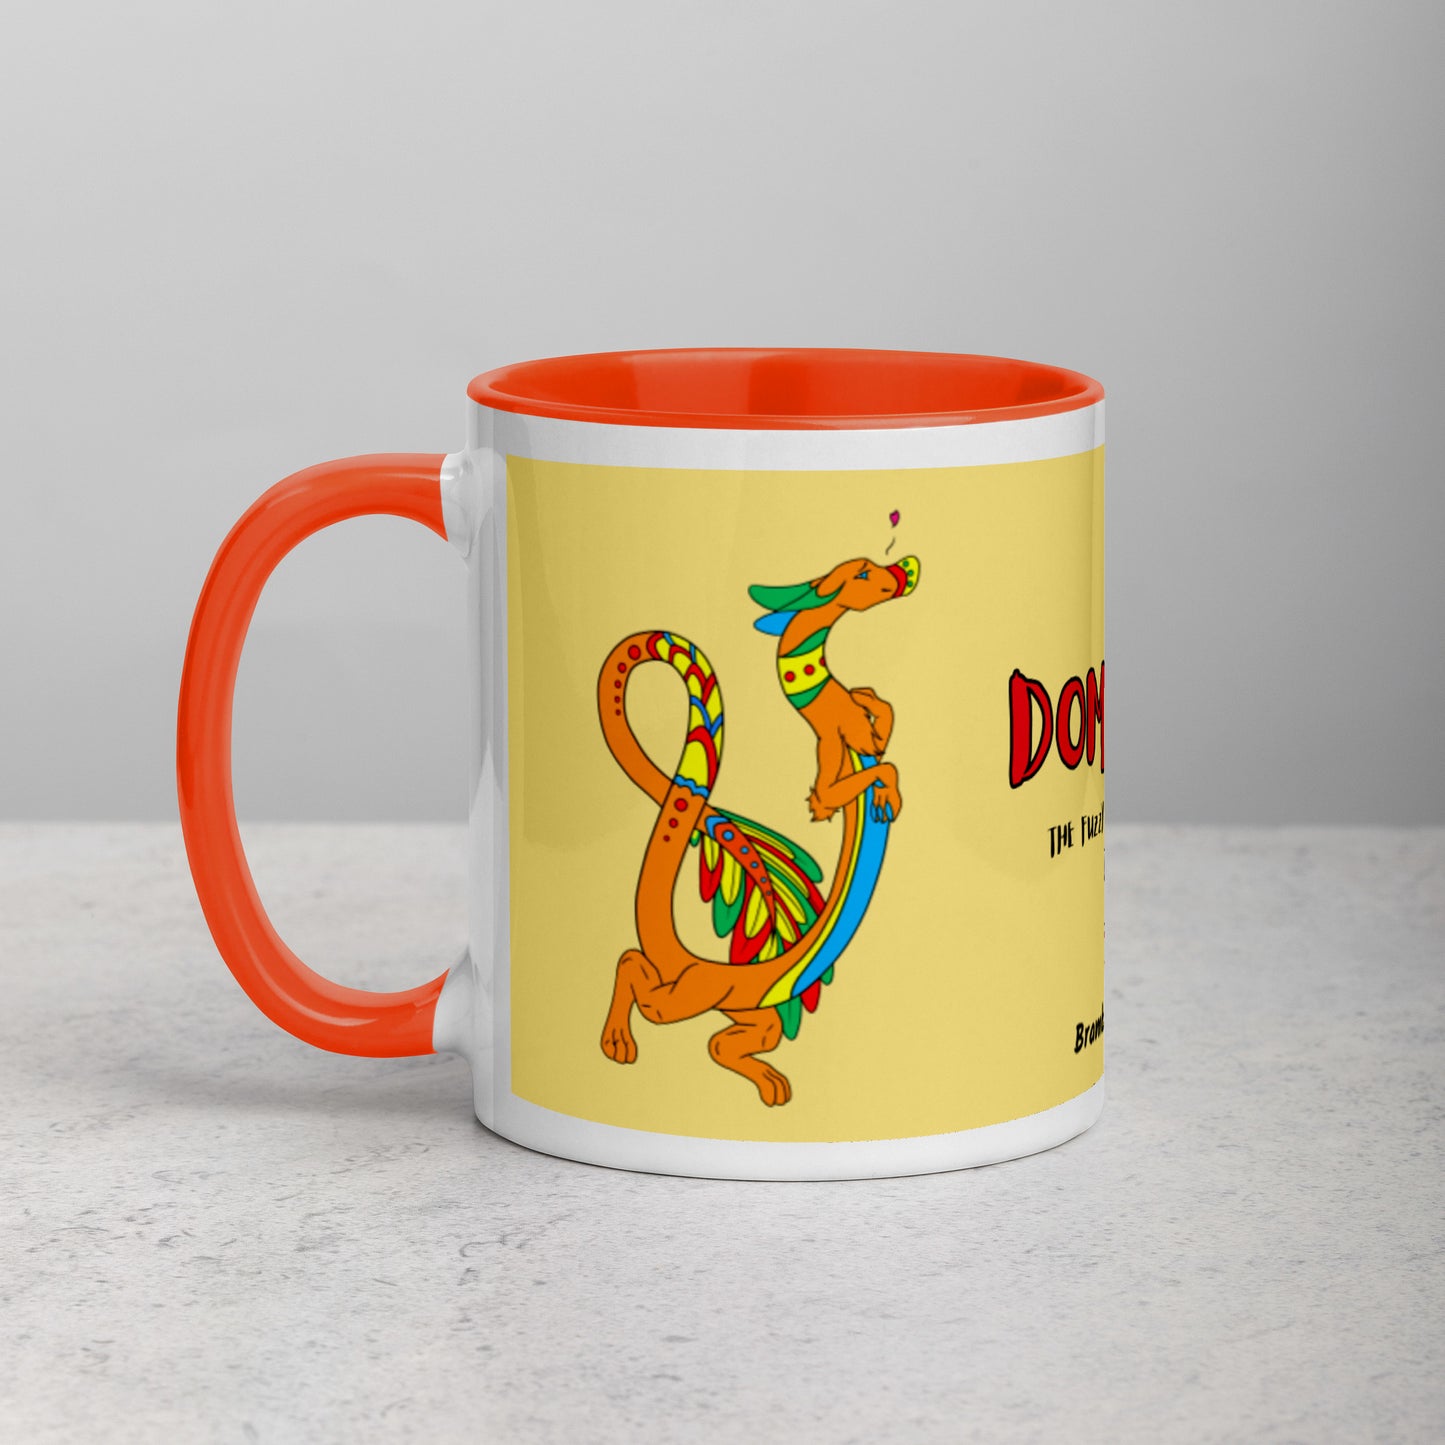 11 ounce white ceramic mug featuring a double-sided image of Domingo the Fuzzy Noodle Dragon against a light yellow background. Orange inside and handle color. Shown on tabletop.